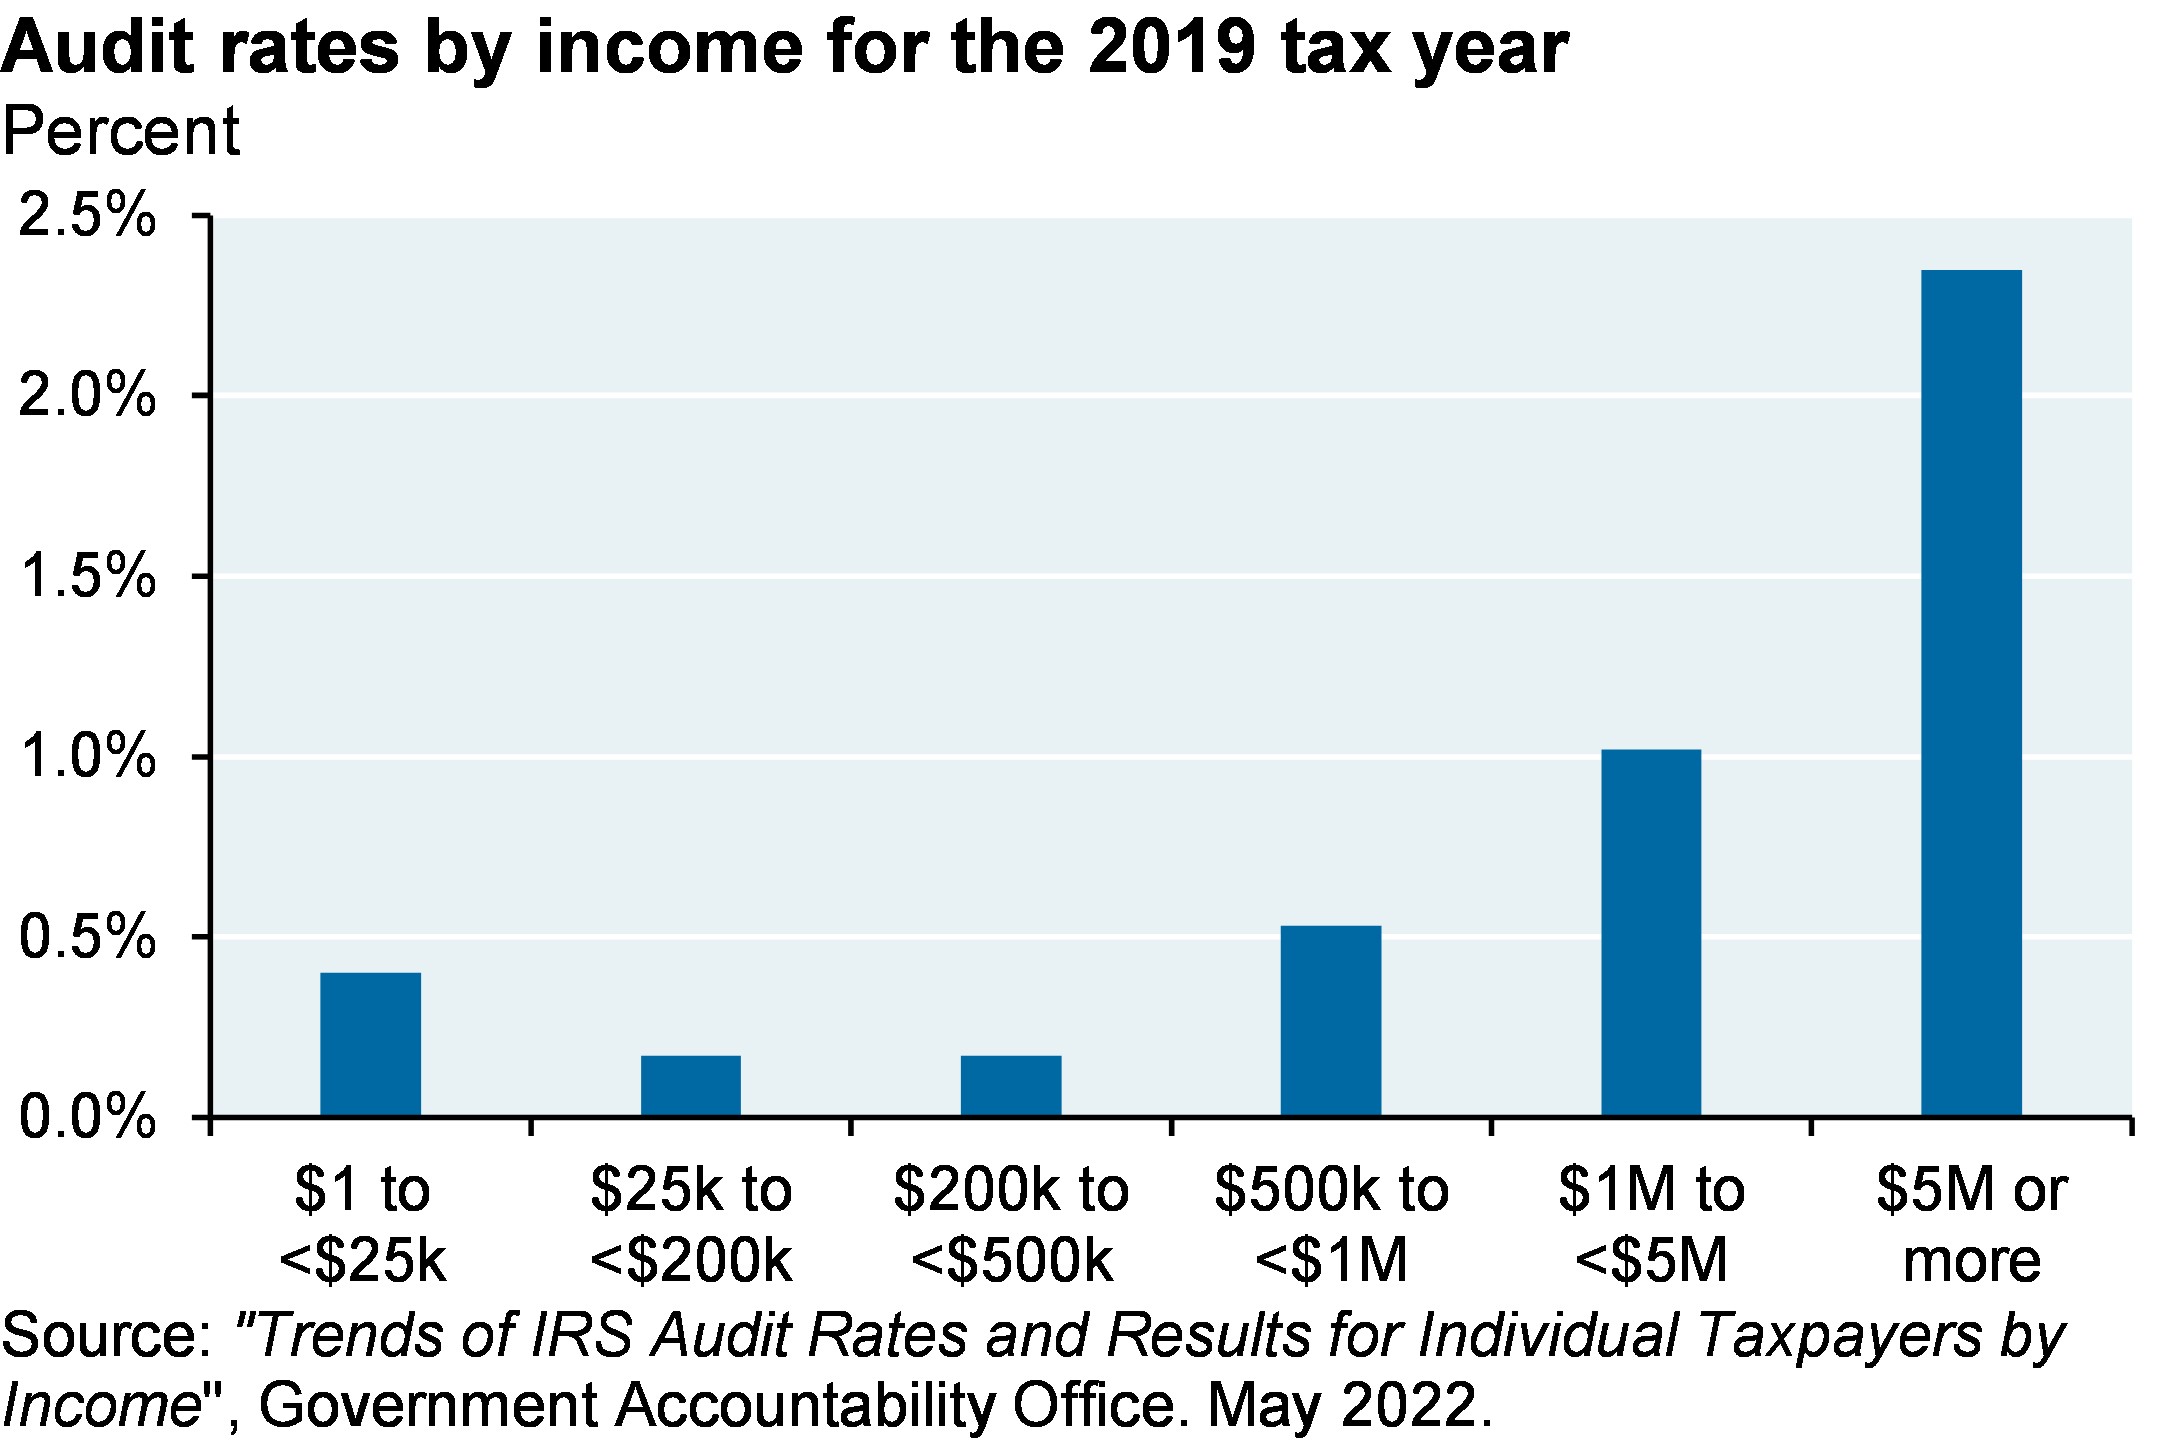 Audit rates by income for the 2019 tax year